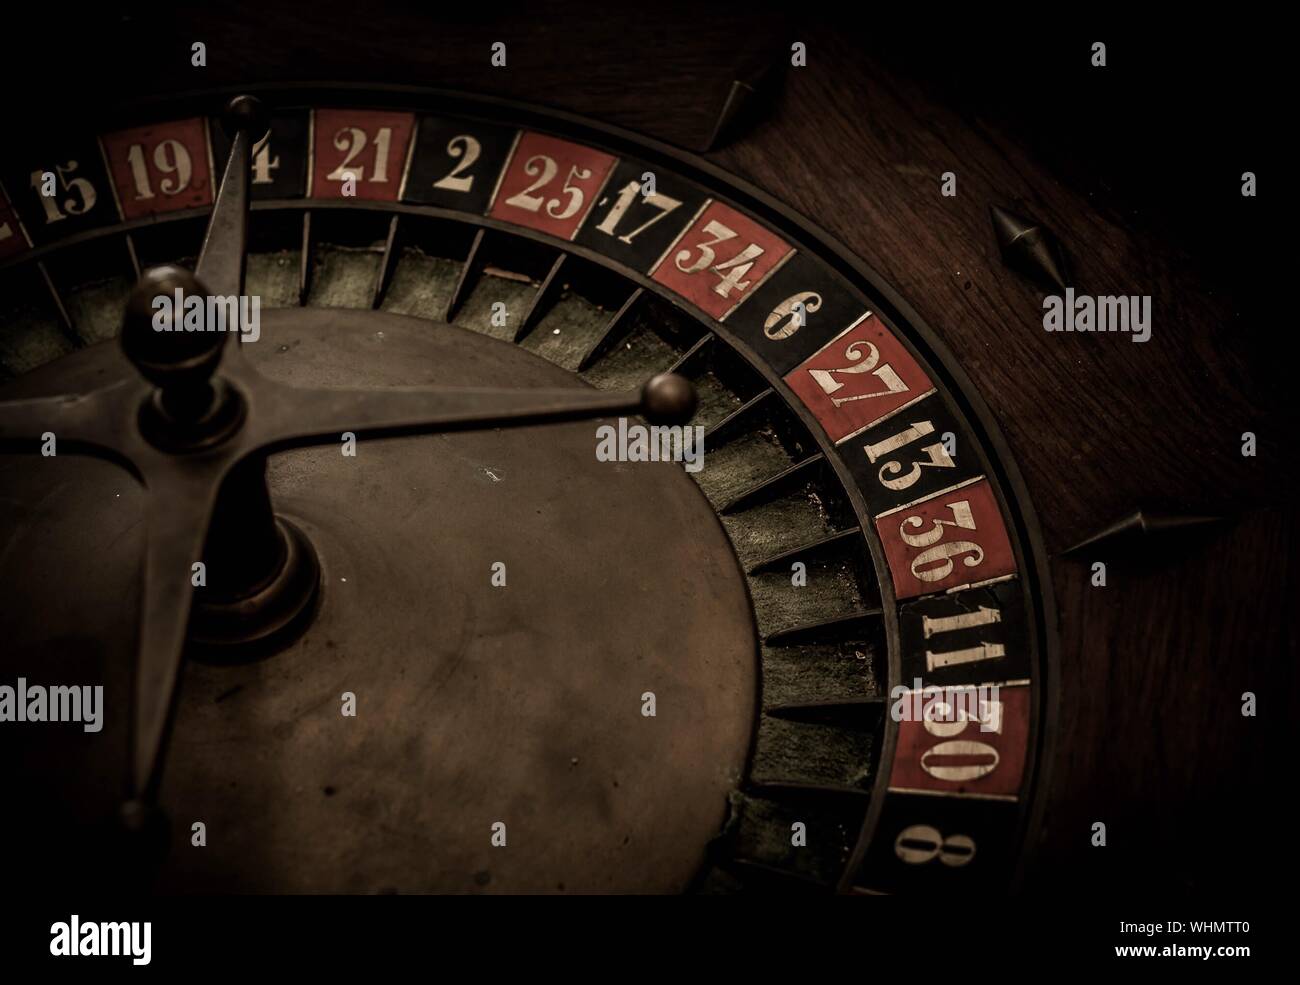 High Angle View Of Roulette Stock Photo